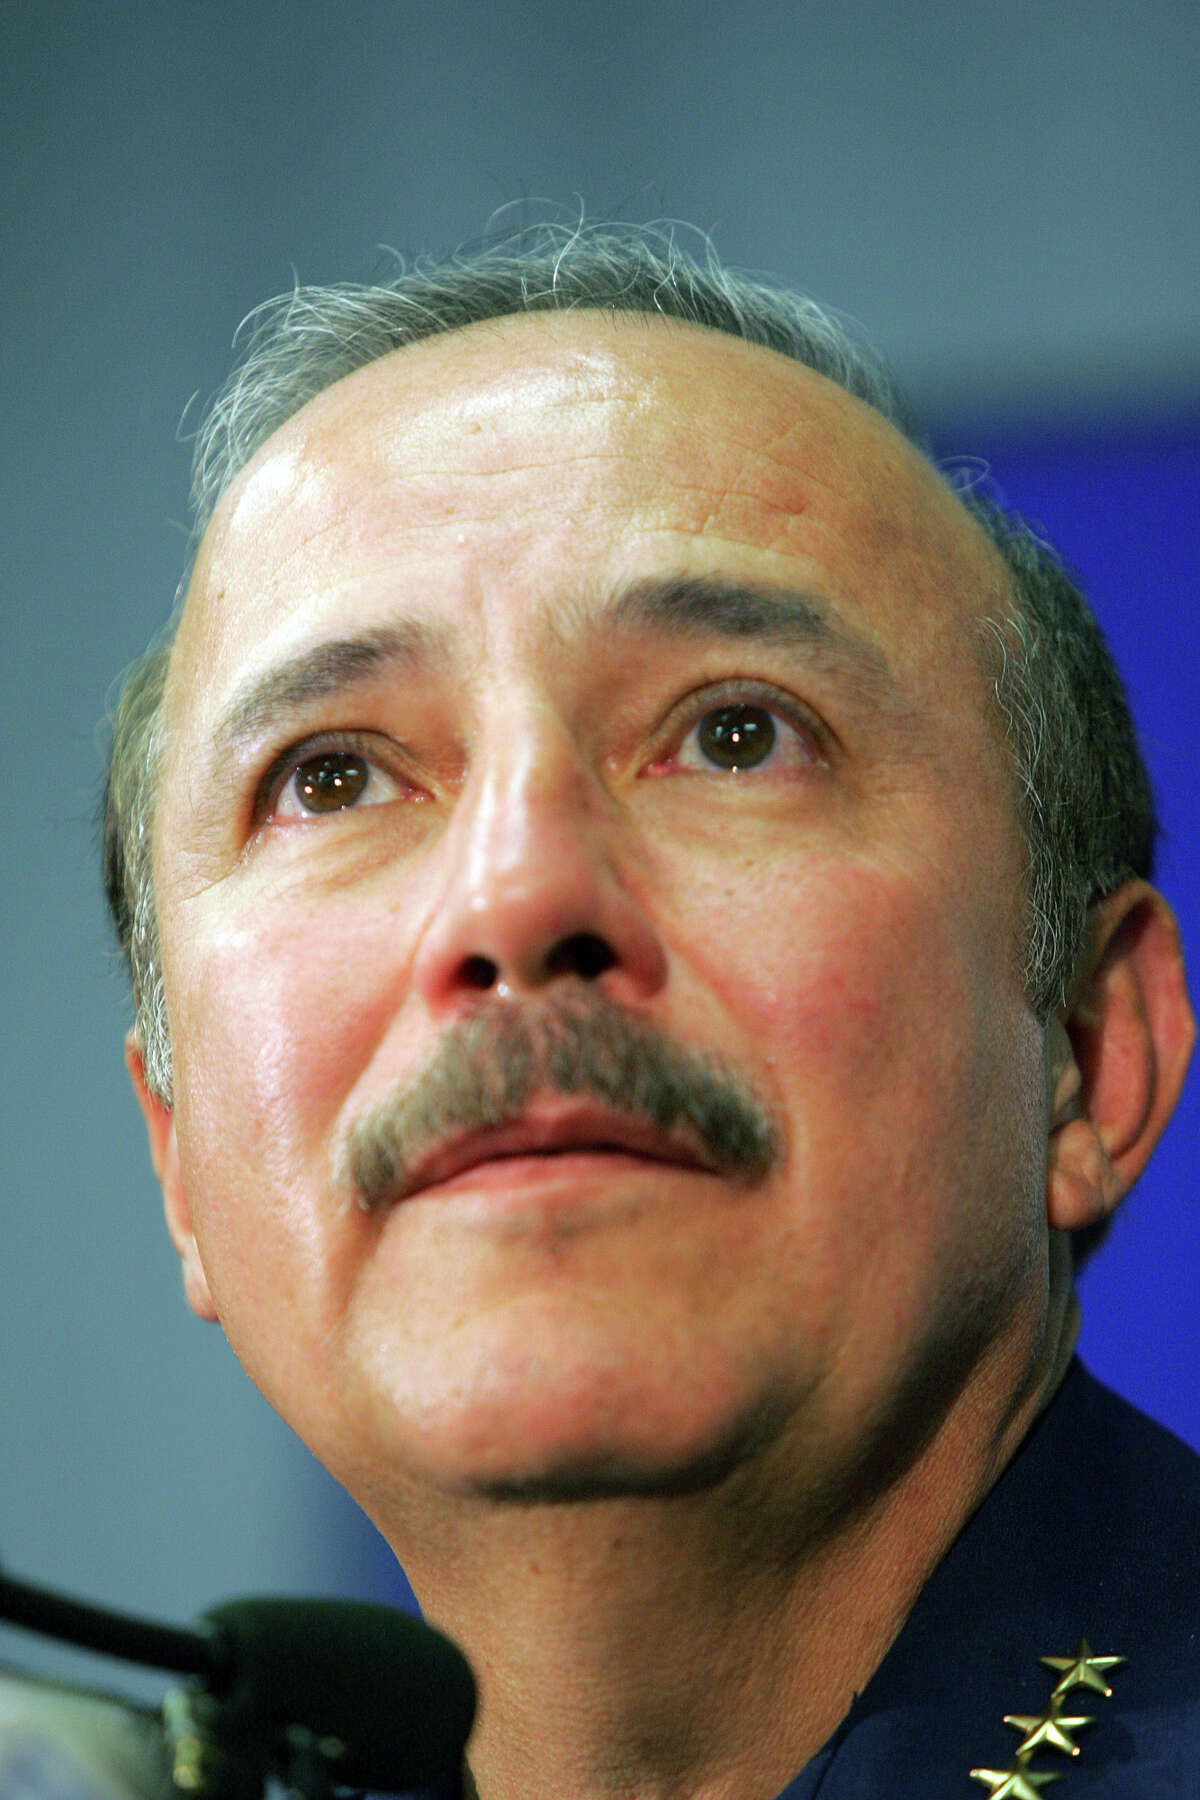 San Antonio Police Chief Albert Ortiz announces his retirement at a press conference on Oct. 25, 2005. The Ortiz brothers, as far as can be determined, are the only two Hispanic siblings to have held the posts of San Antonio police chief and Bexar County sheriff.